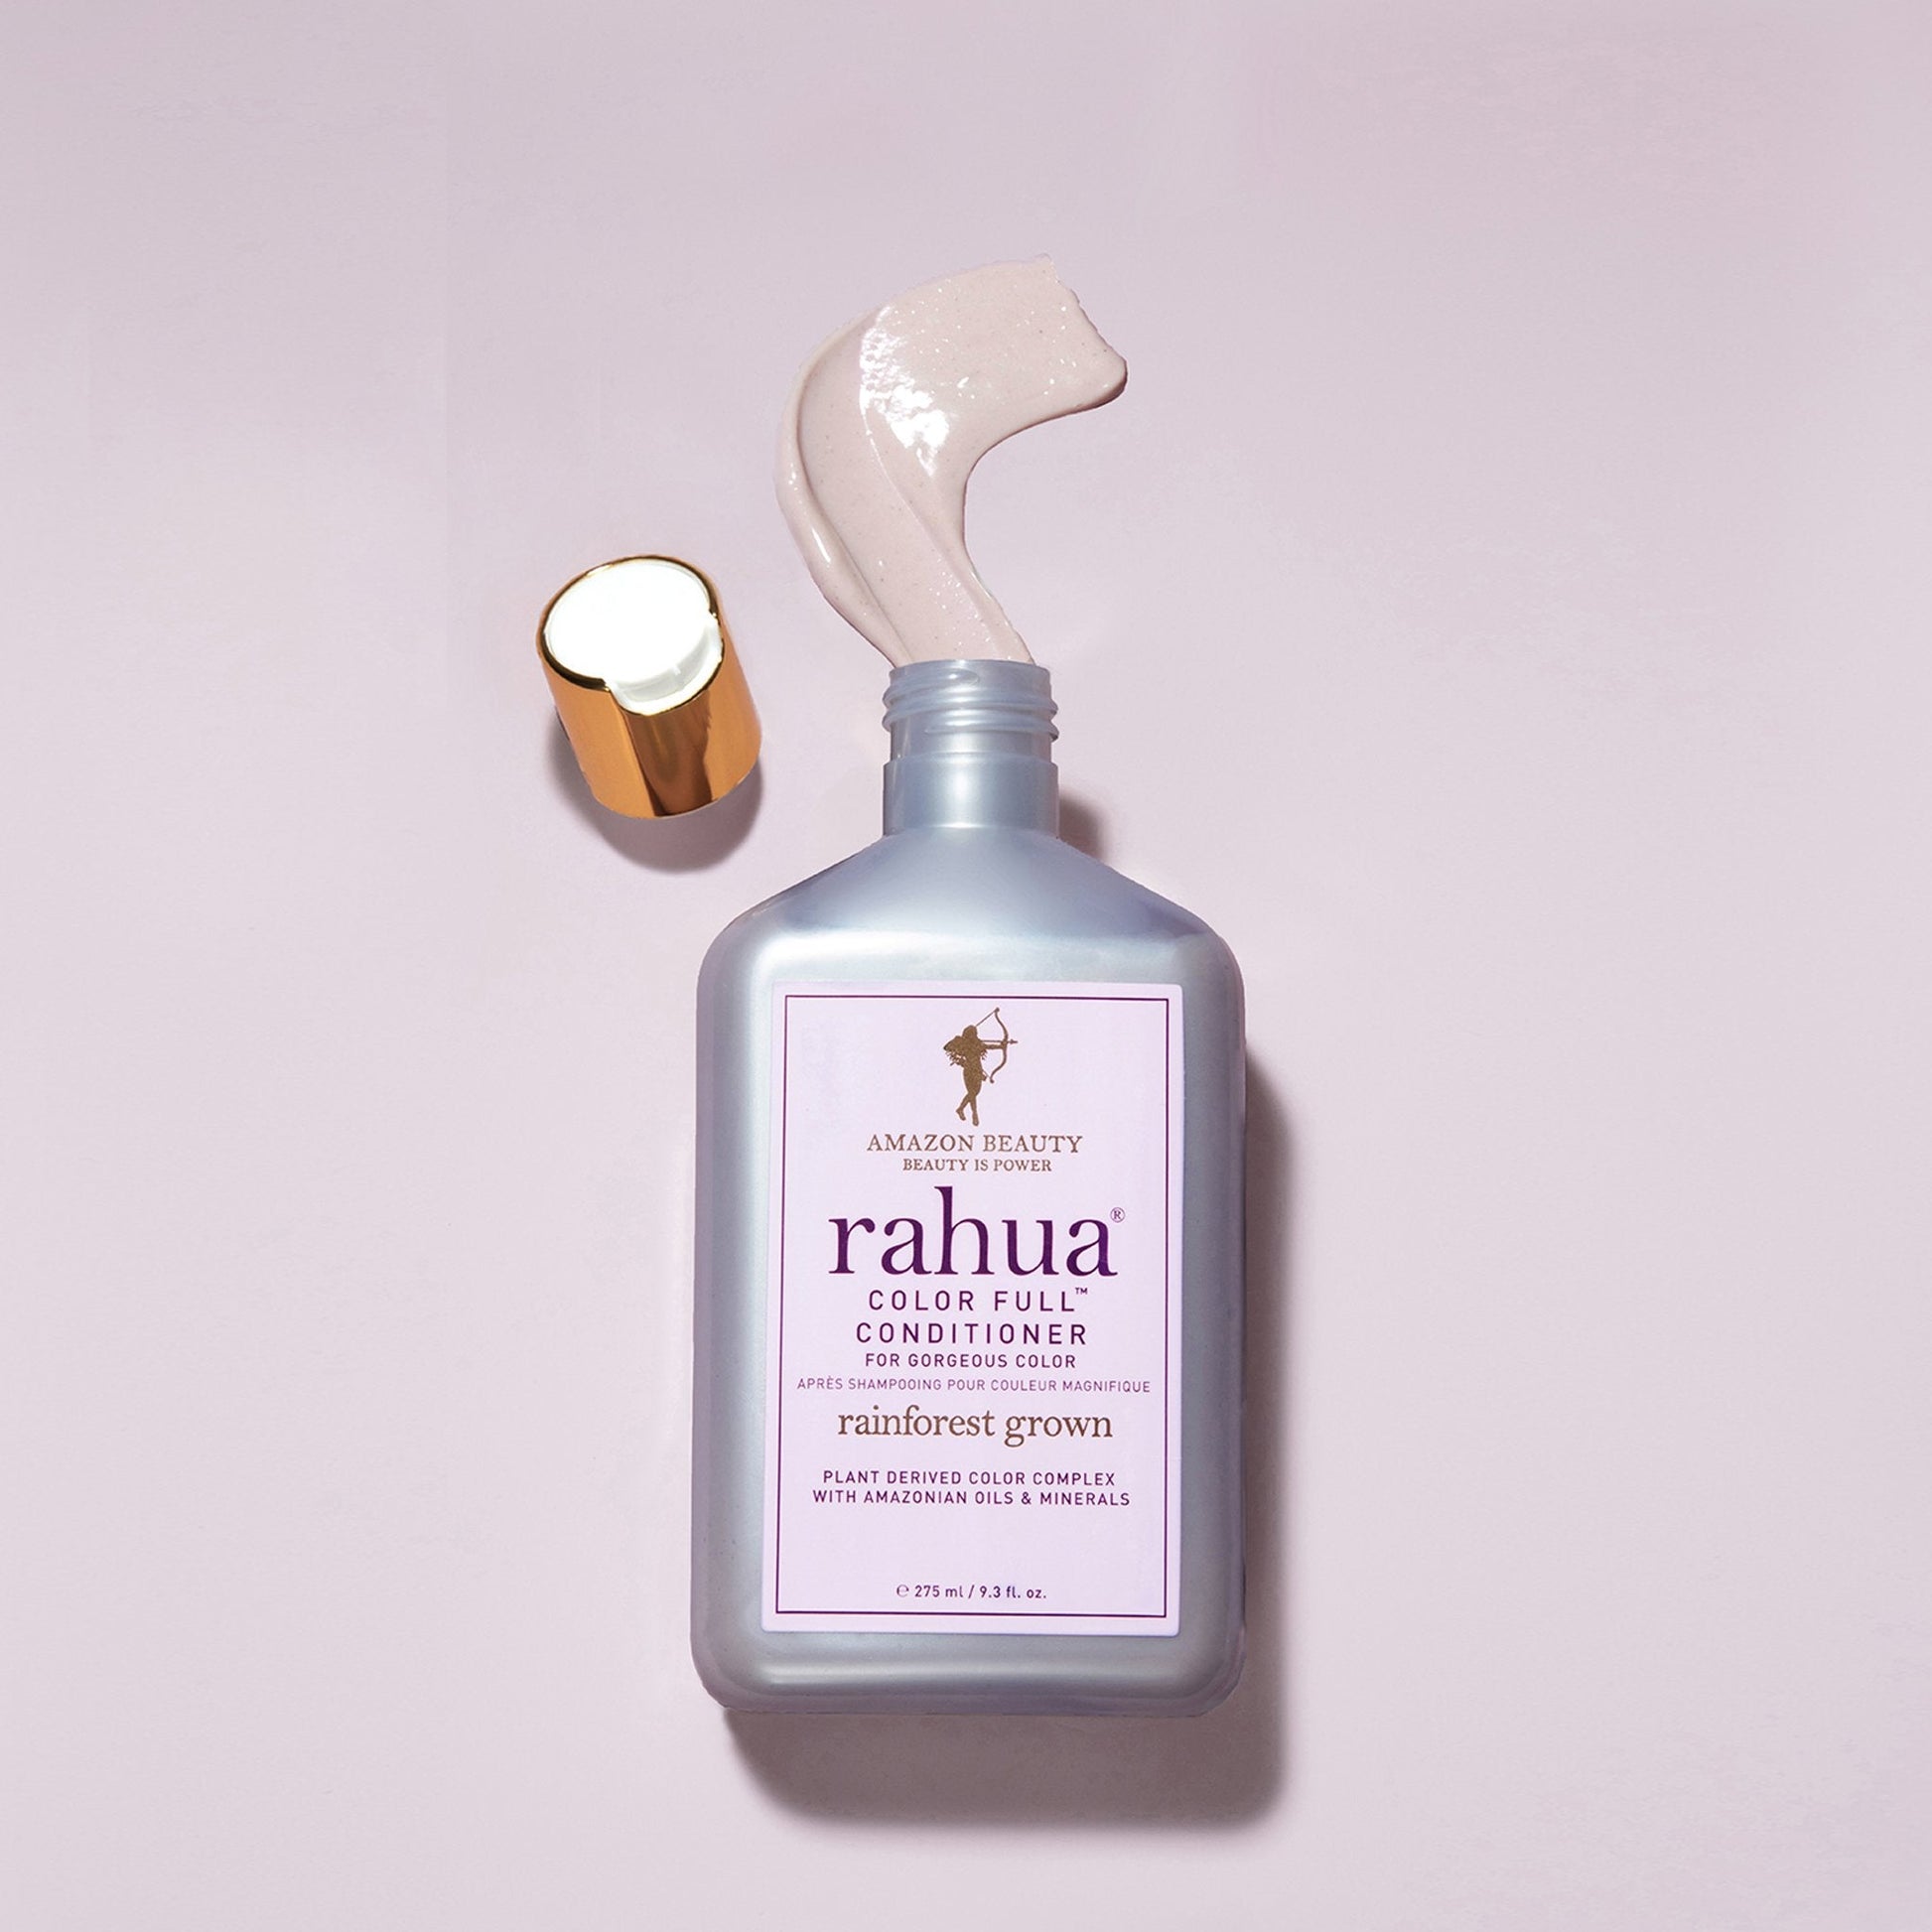 Rahua color full conidtioner open bottle with creamy conditioner texture